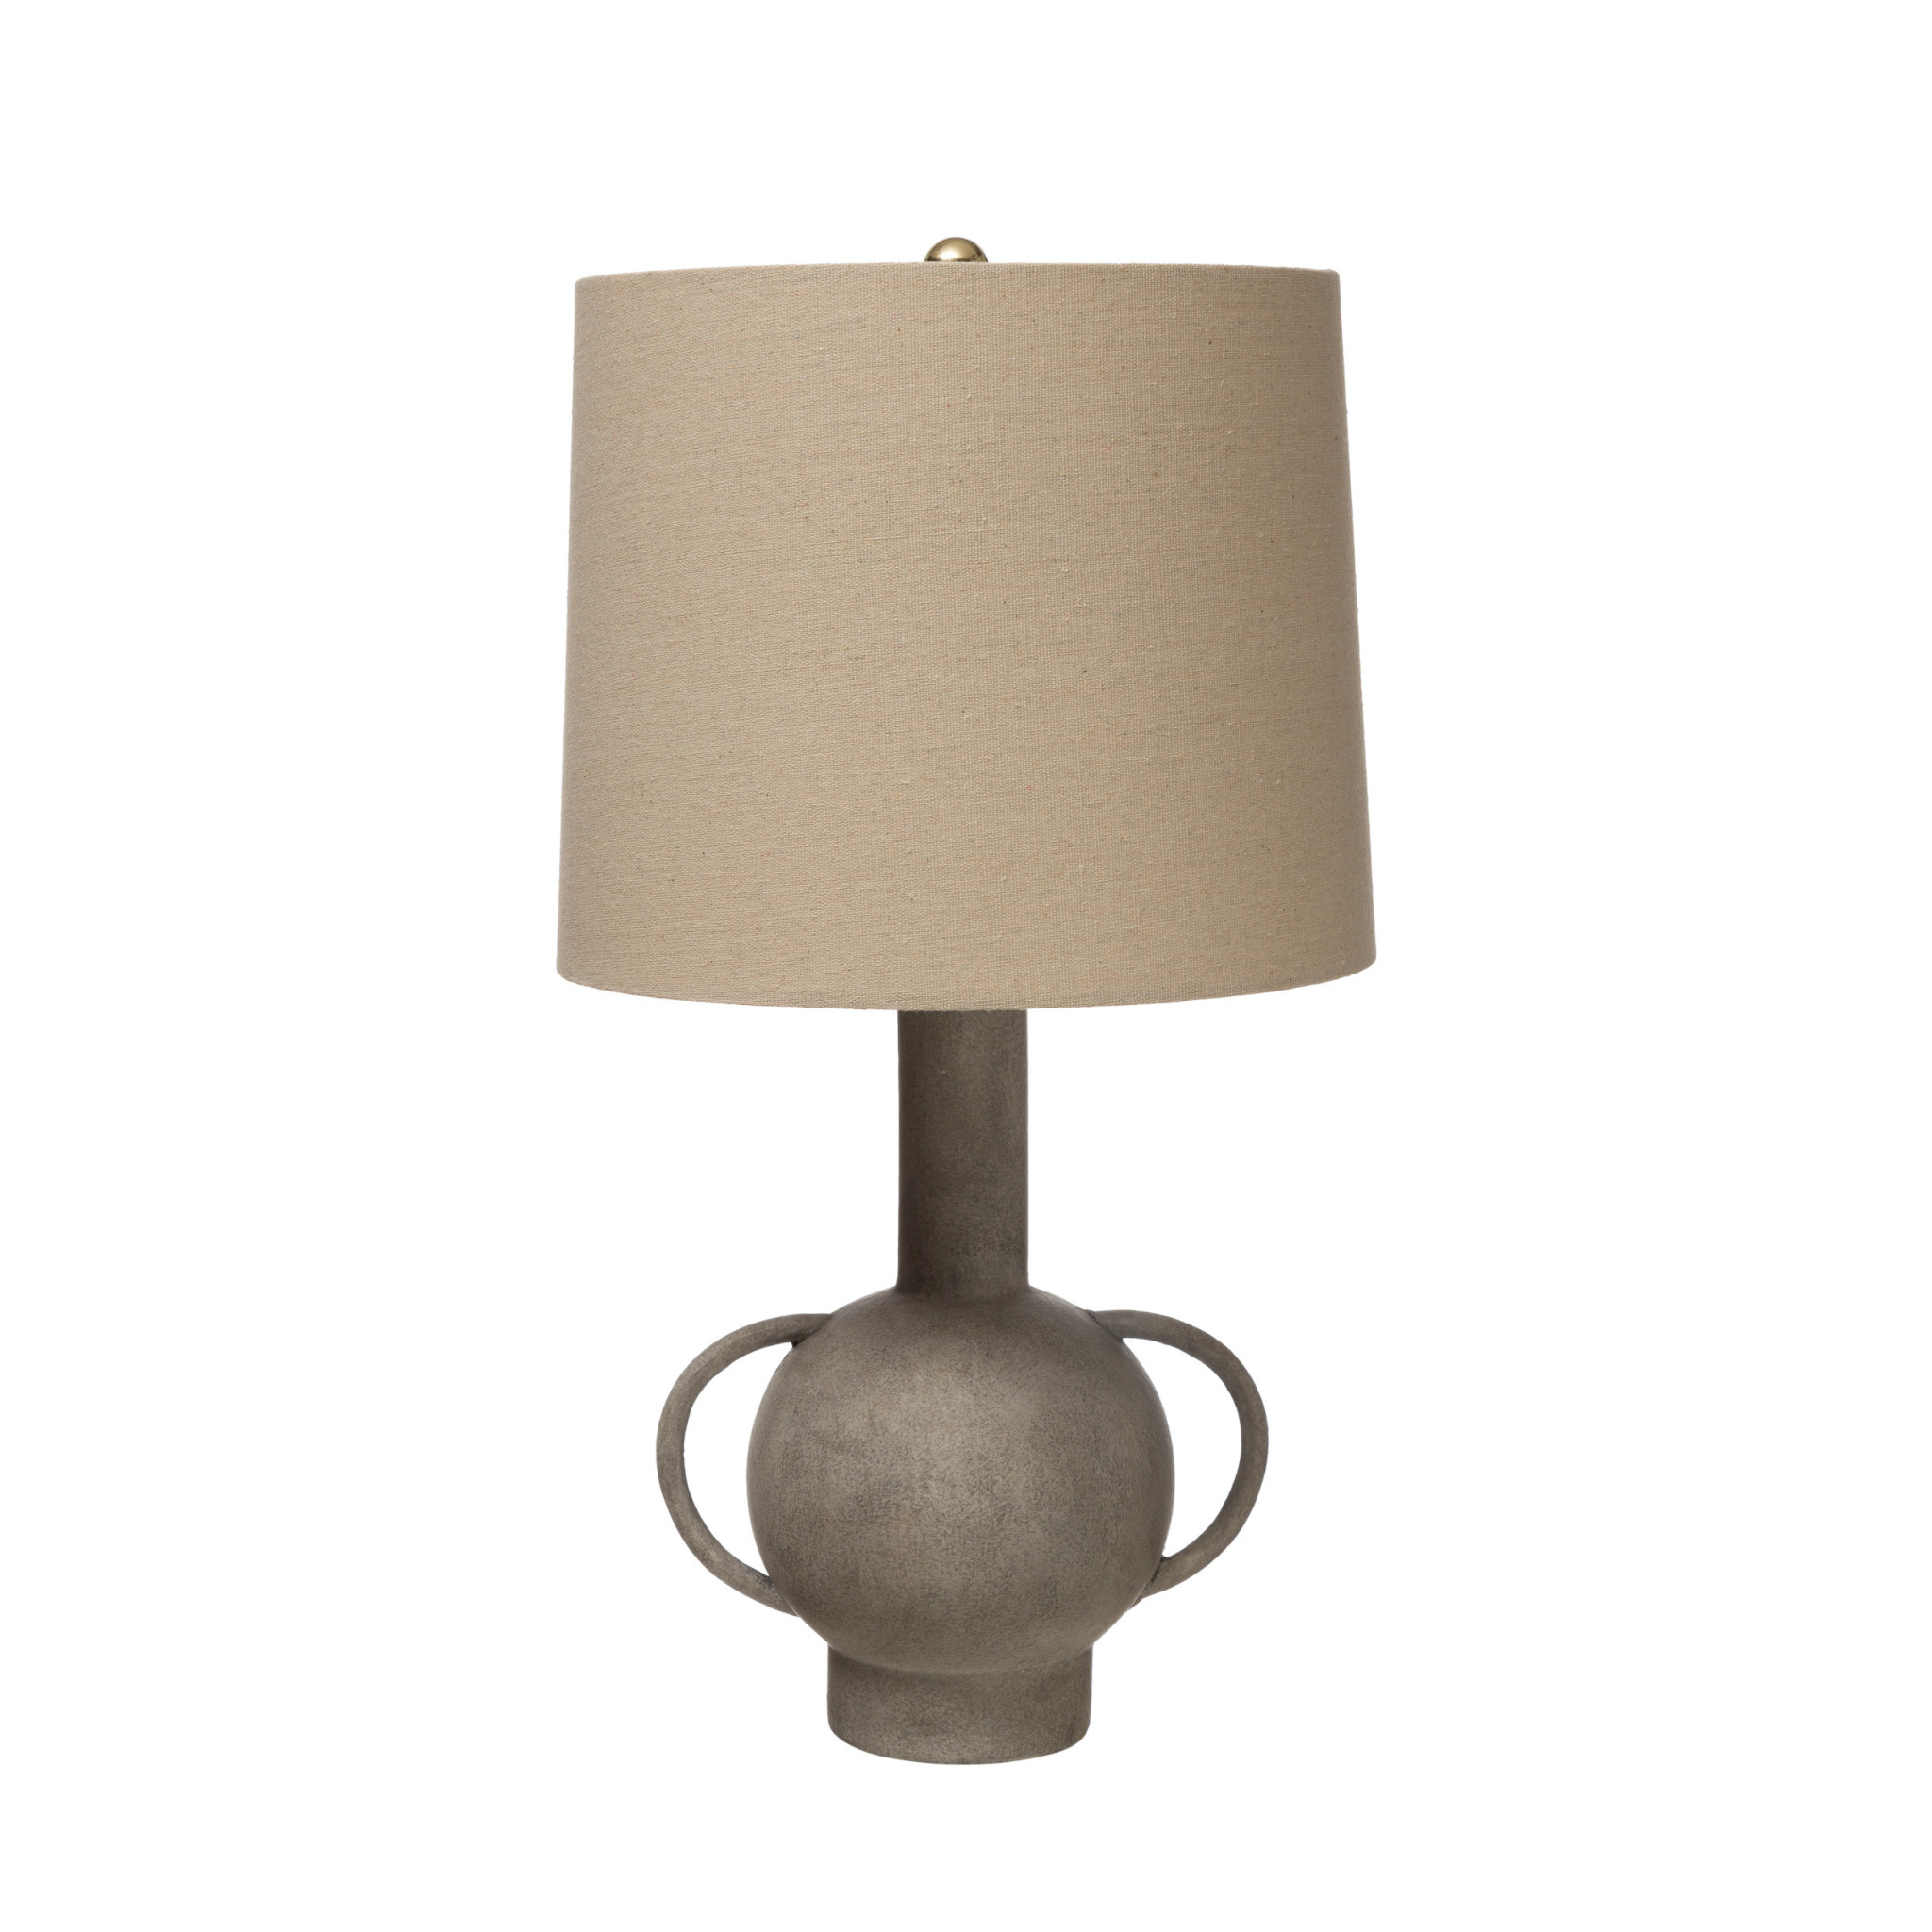 Distressed Table Lamp w/ Shade and Handles, 12x23", Available for local pick up